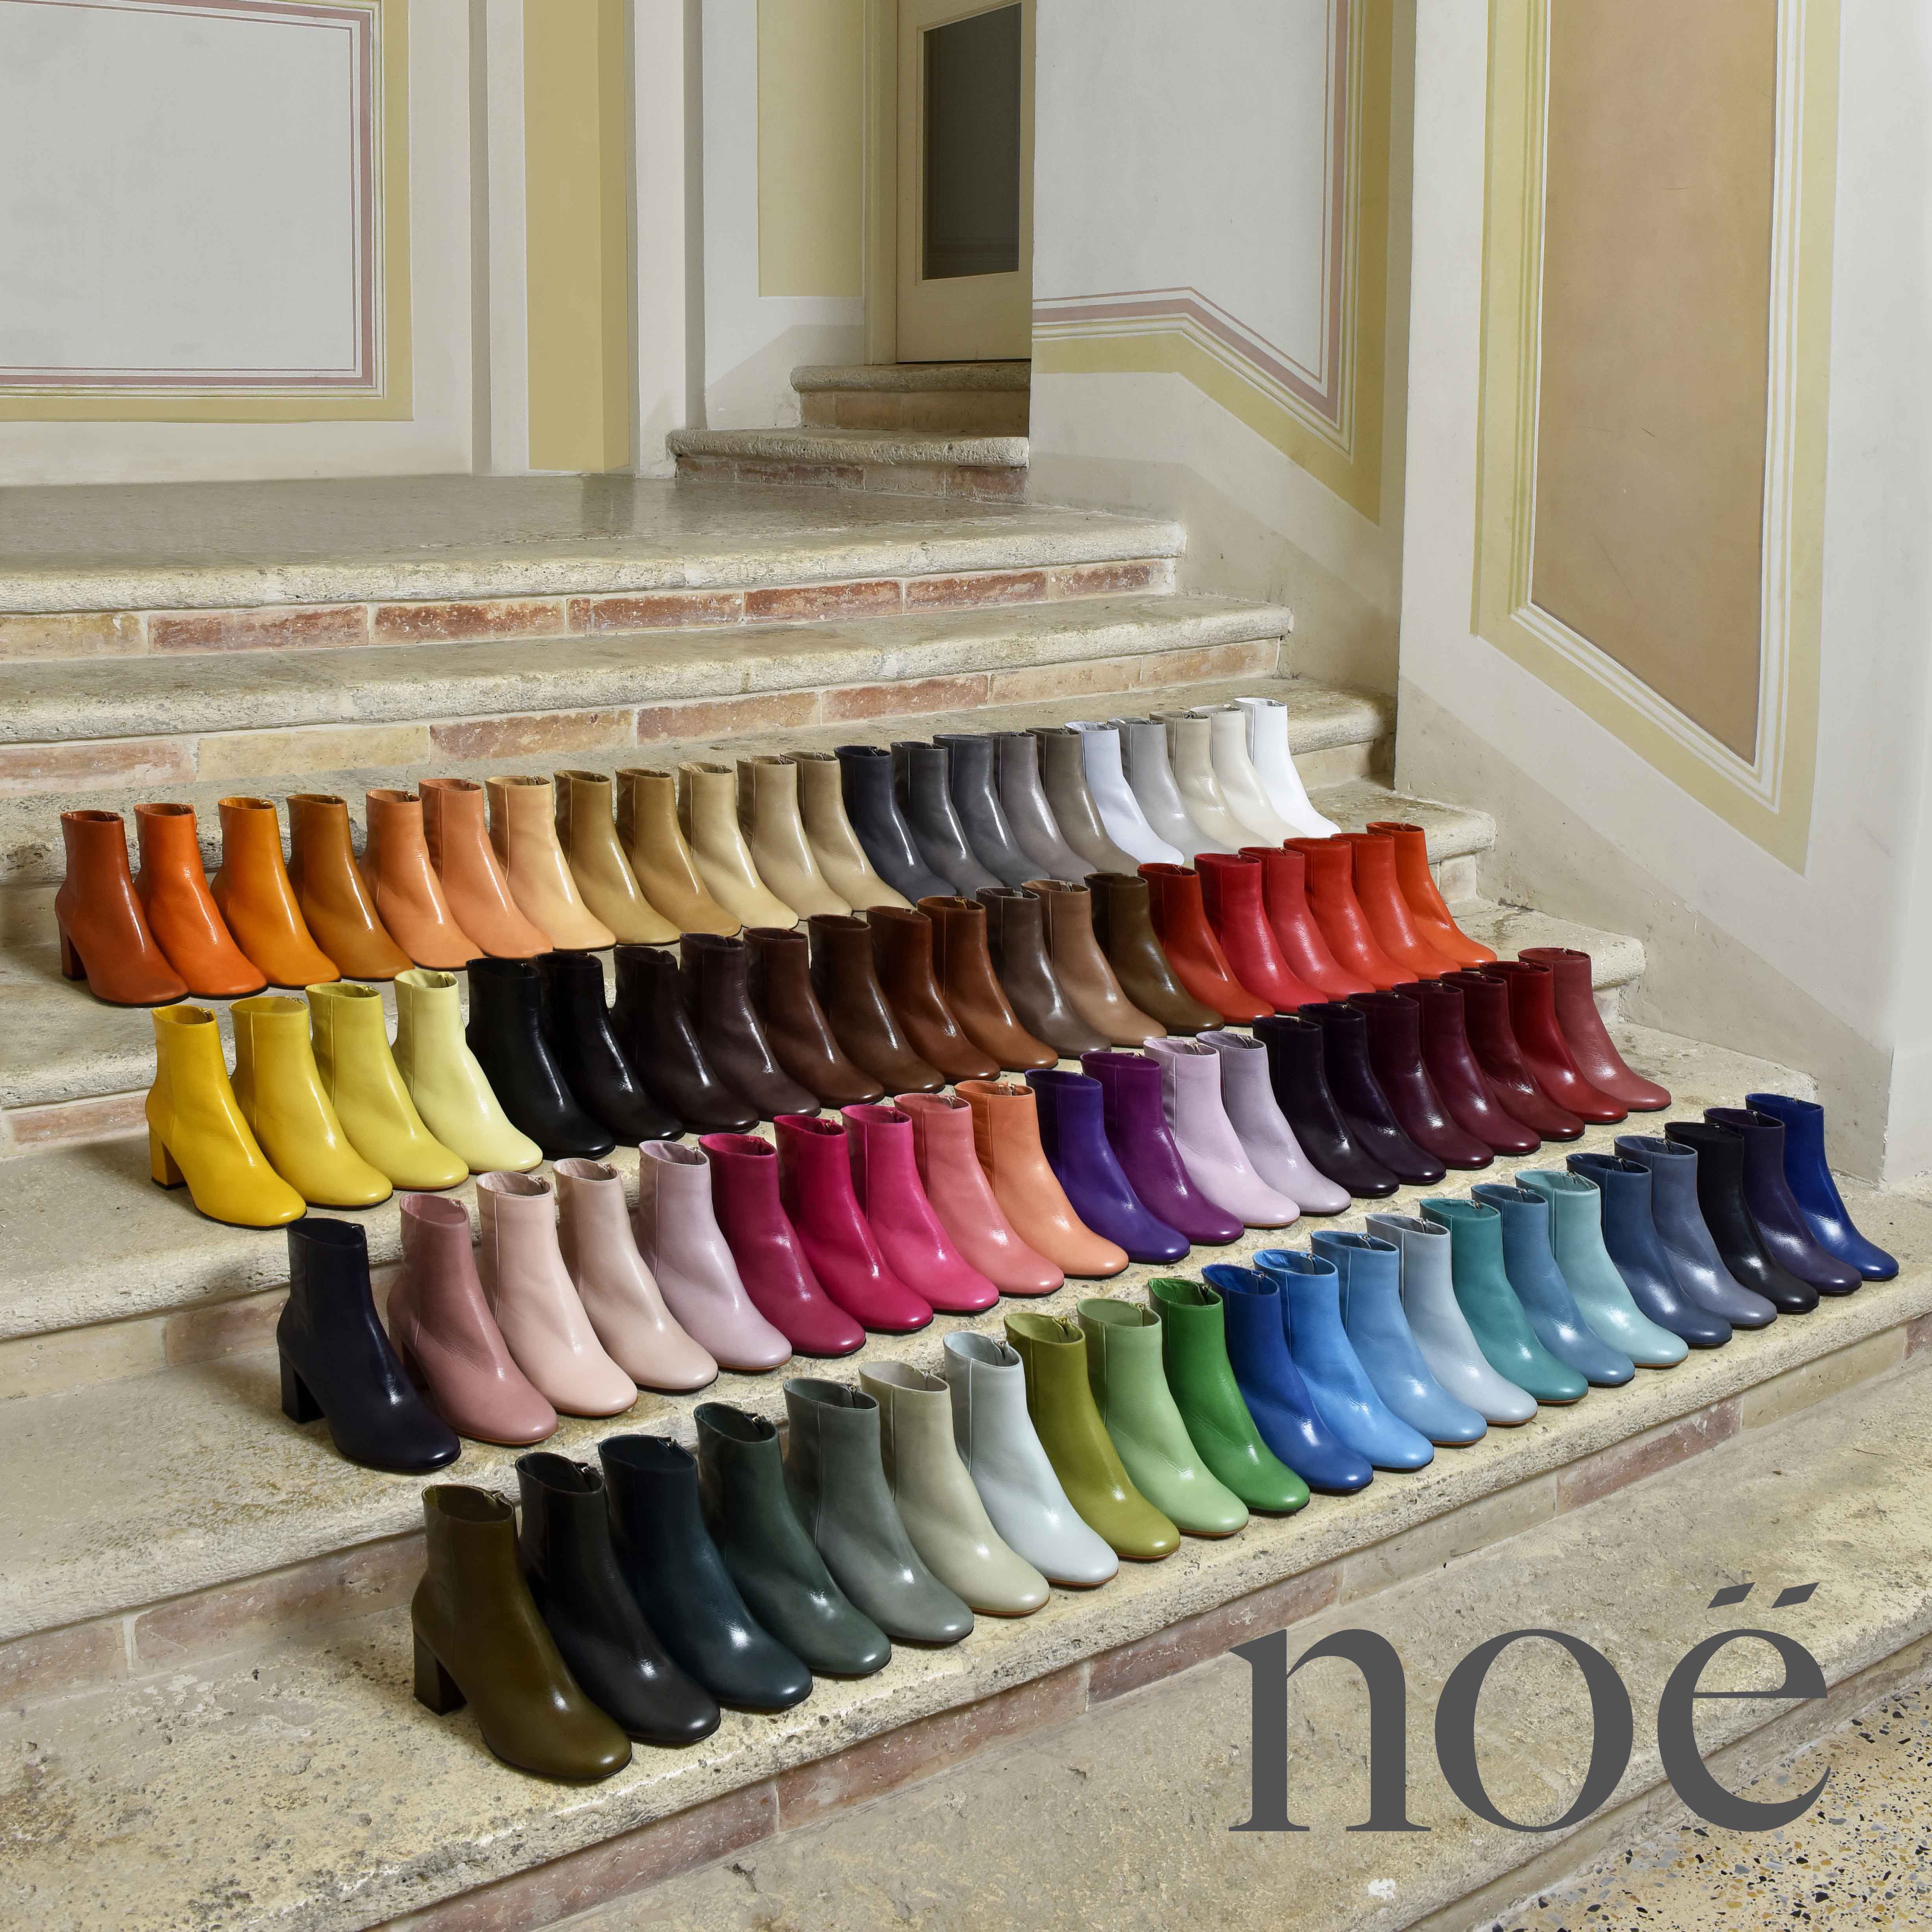 Noë pumps, boots and accessories - the 